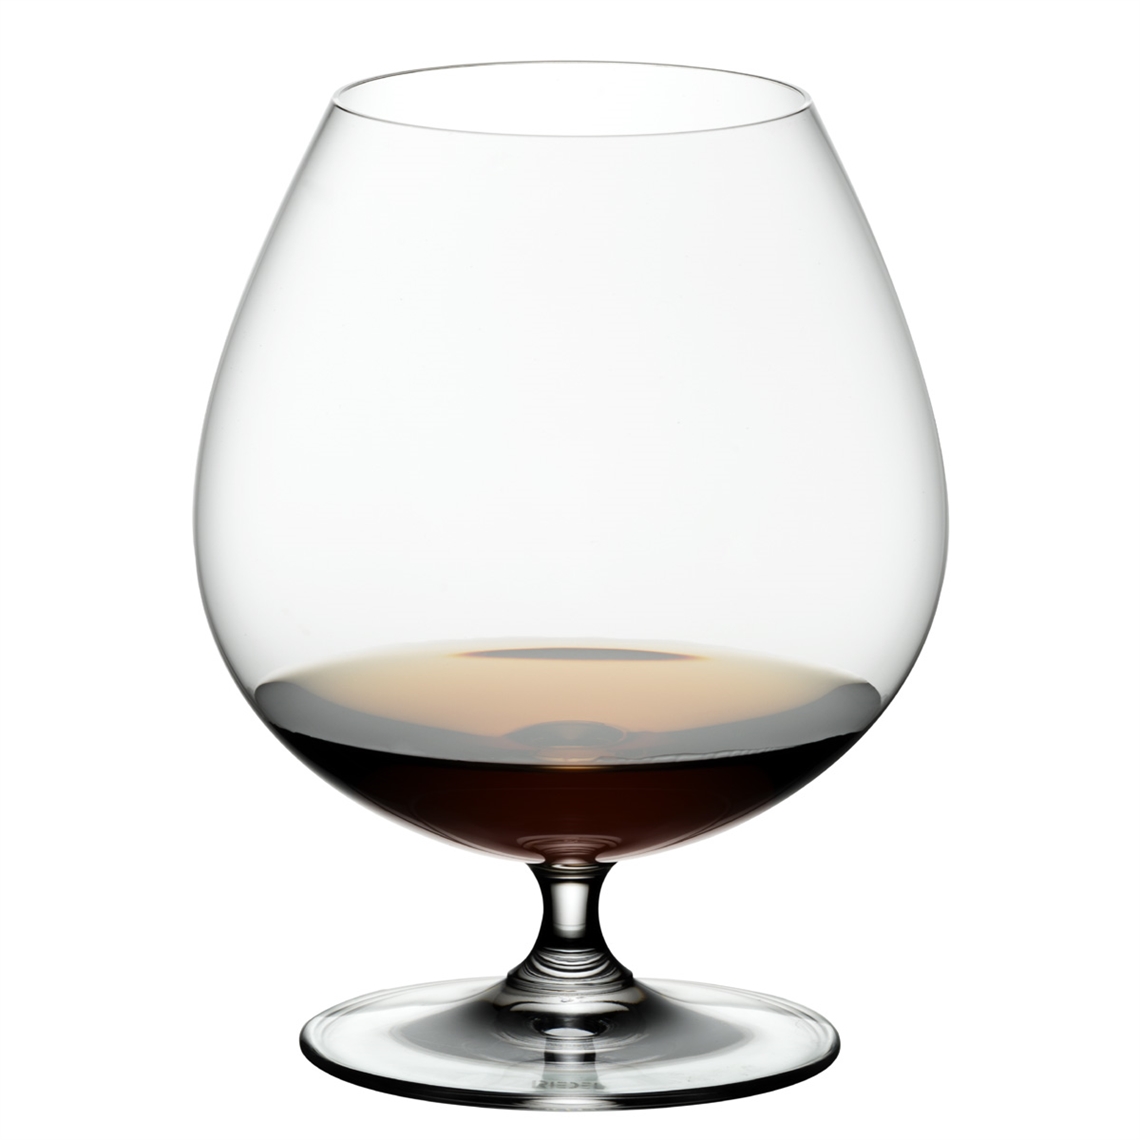 View more chablis wine glasses from our Spirit Glasses range